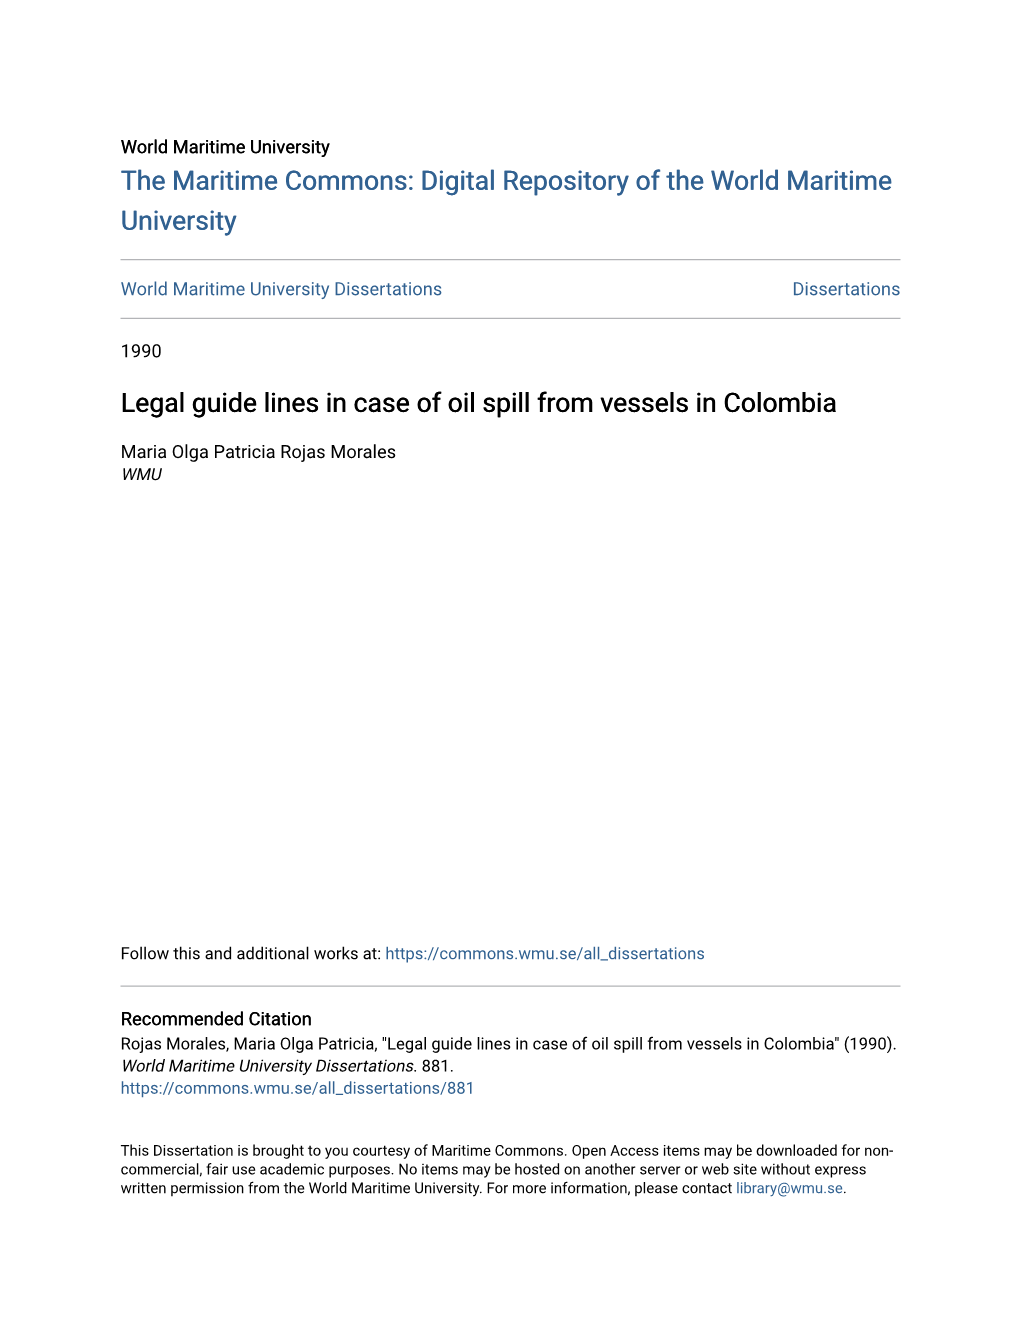 Legal Guide Lines in Case of Oil Spill from Vessels in Colombia